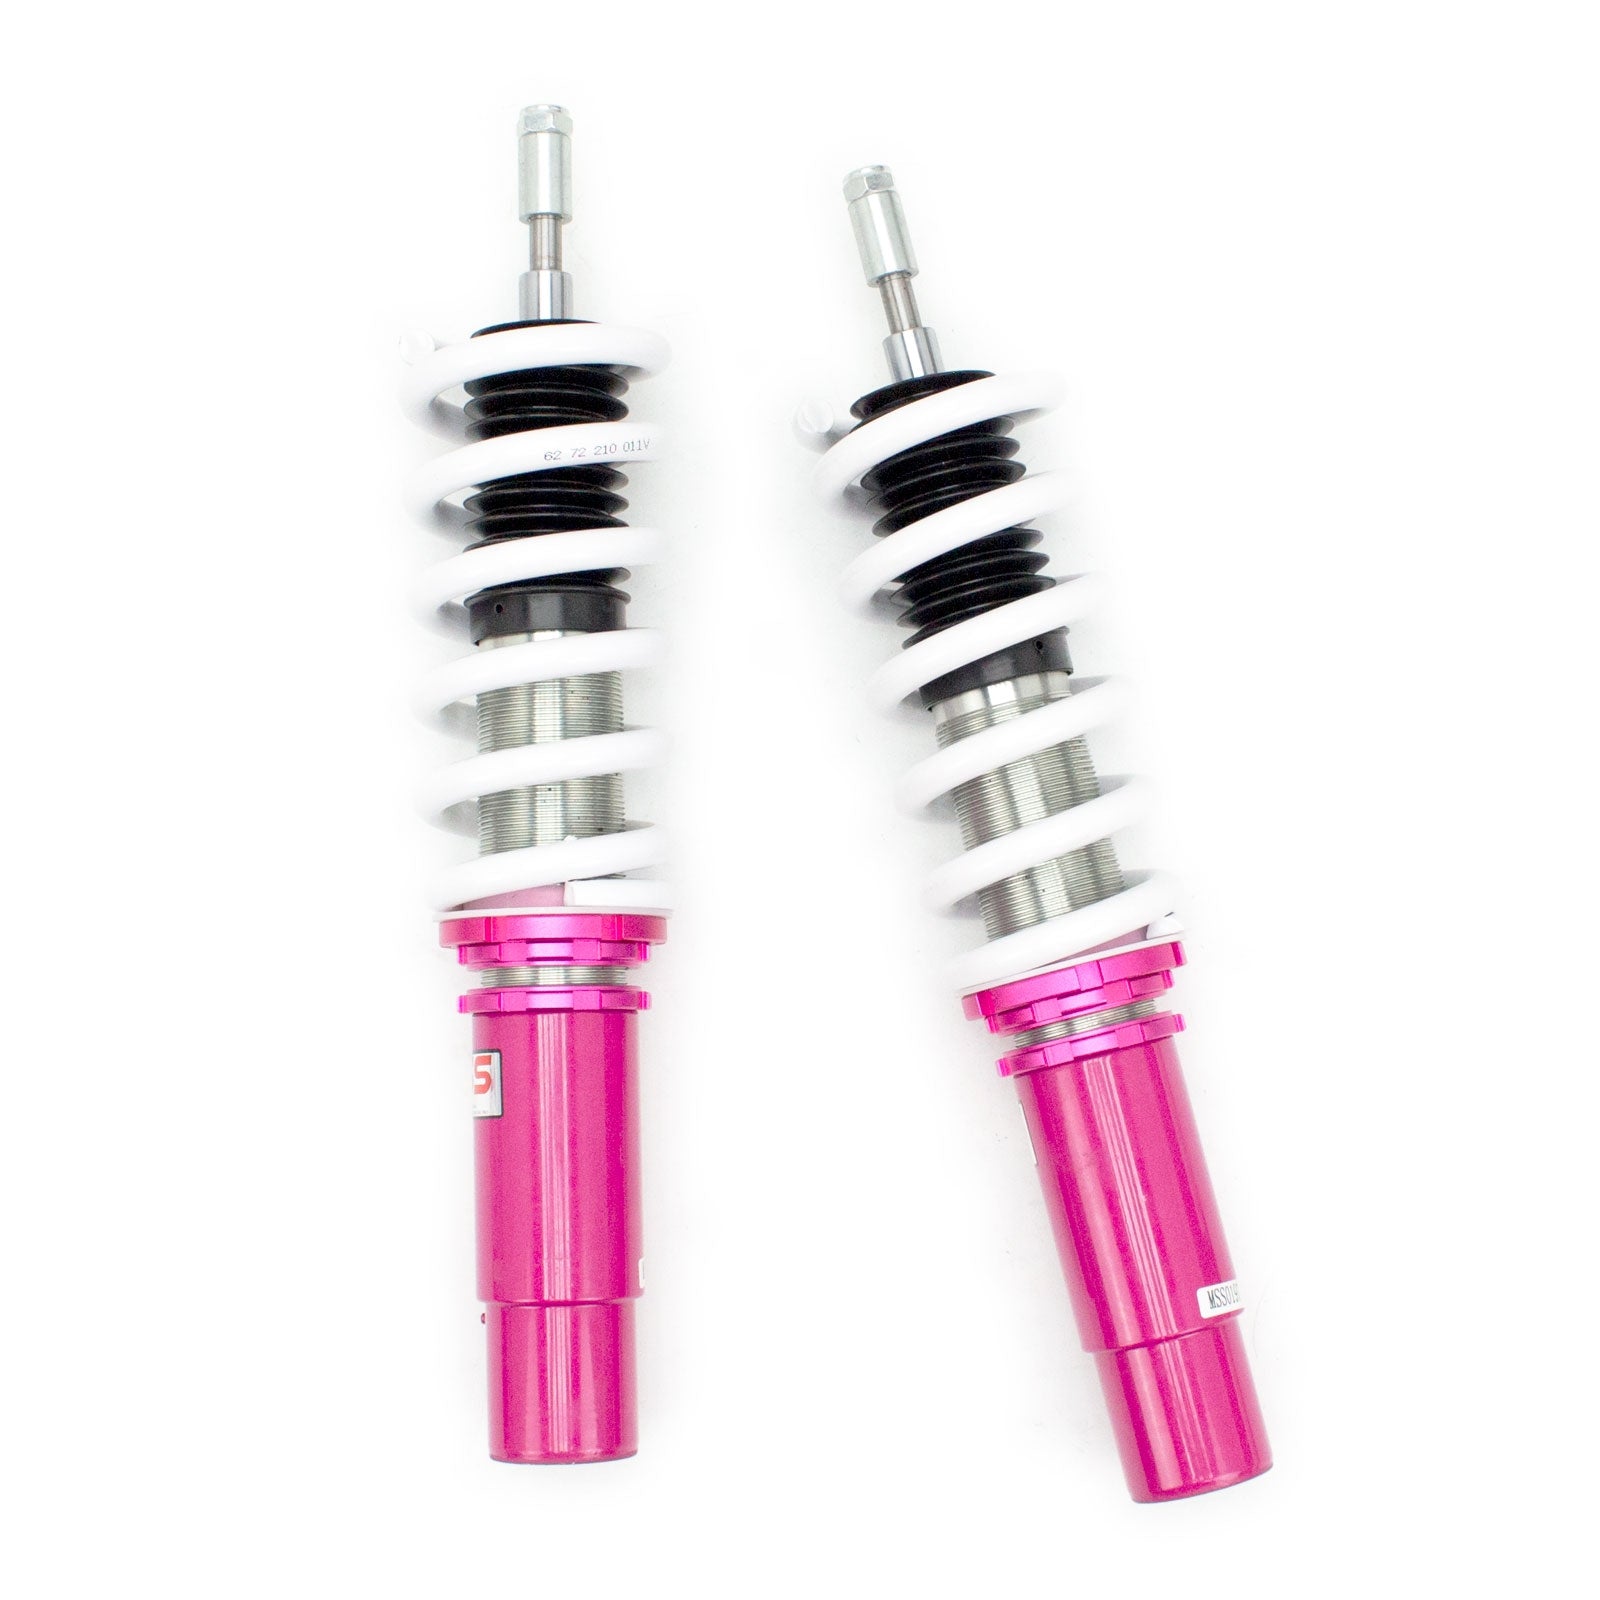 Godspeed(MSS0197-B)MonoSS Coilover Lowering Kit, Fully Adjustable, Ride Height, Spring Tension And 16 Click Damping, Audi A7 Quattro 2012-17